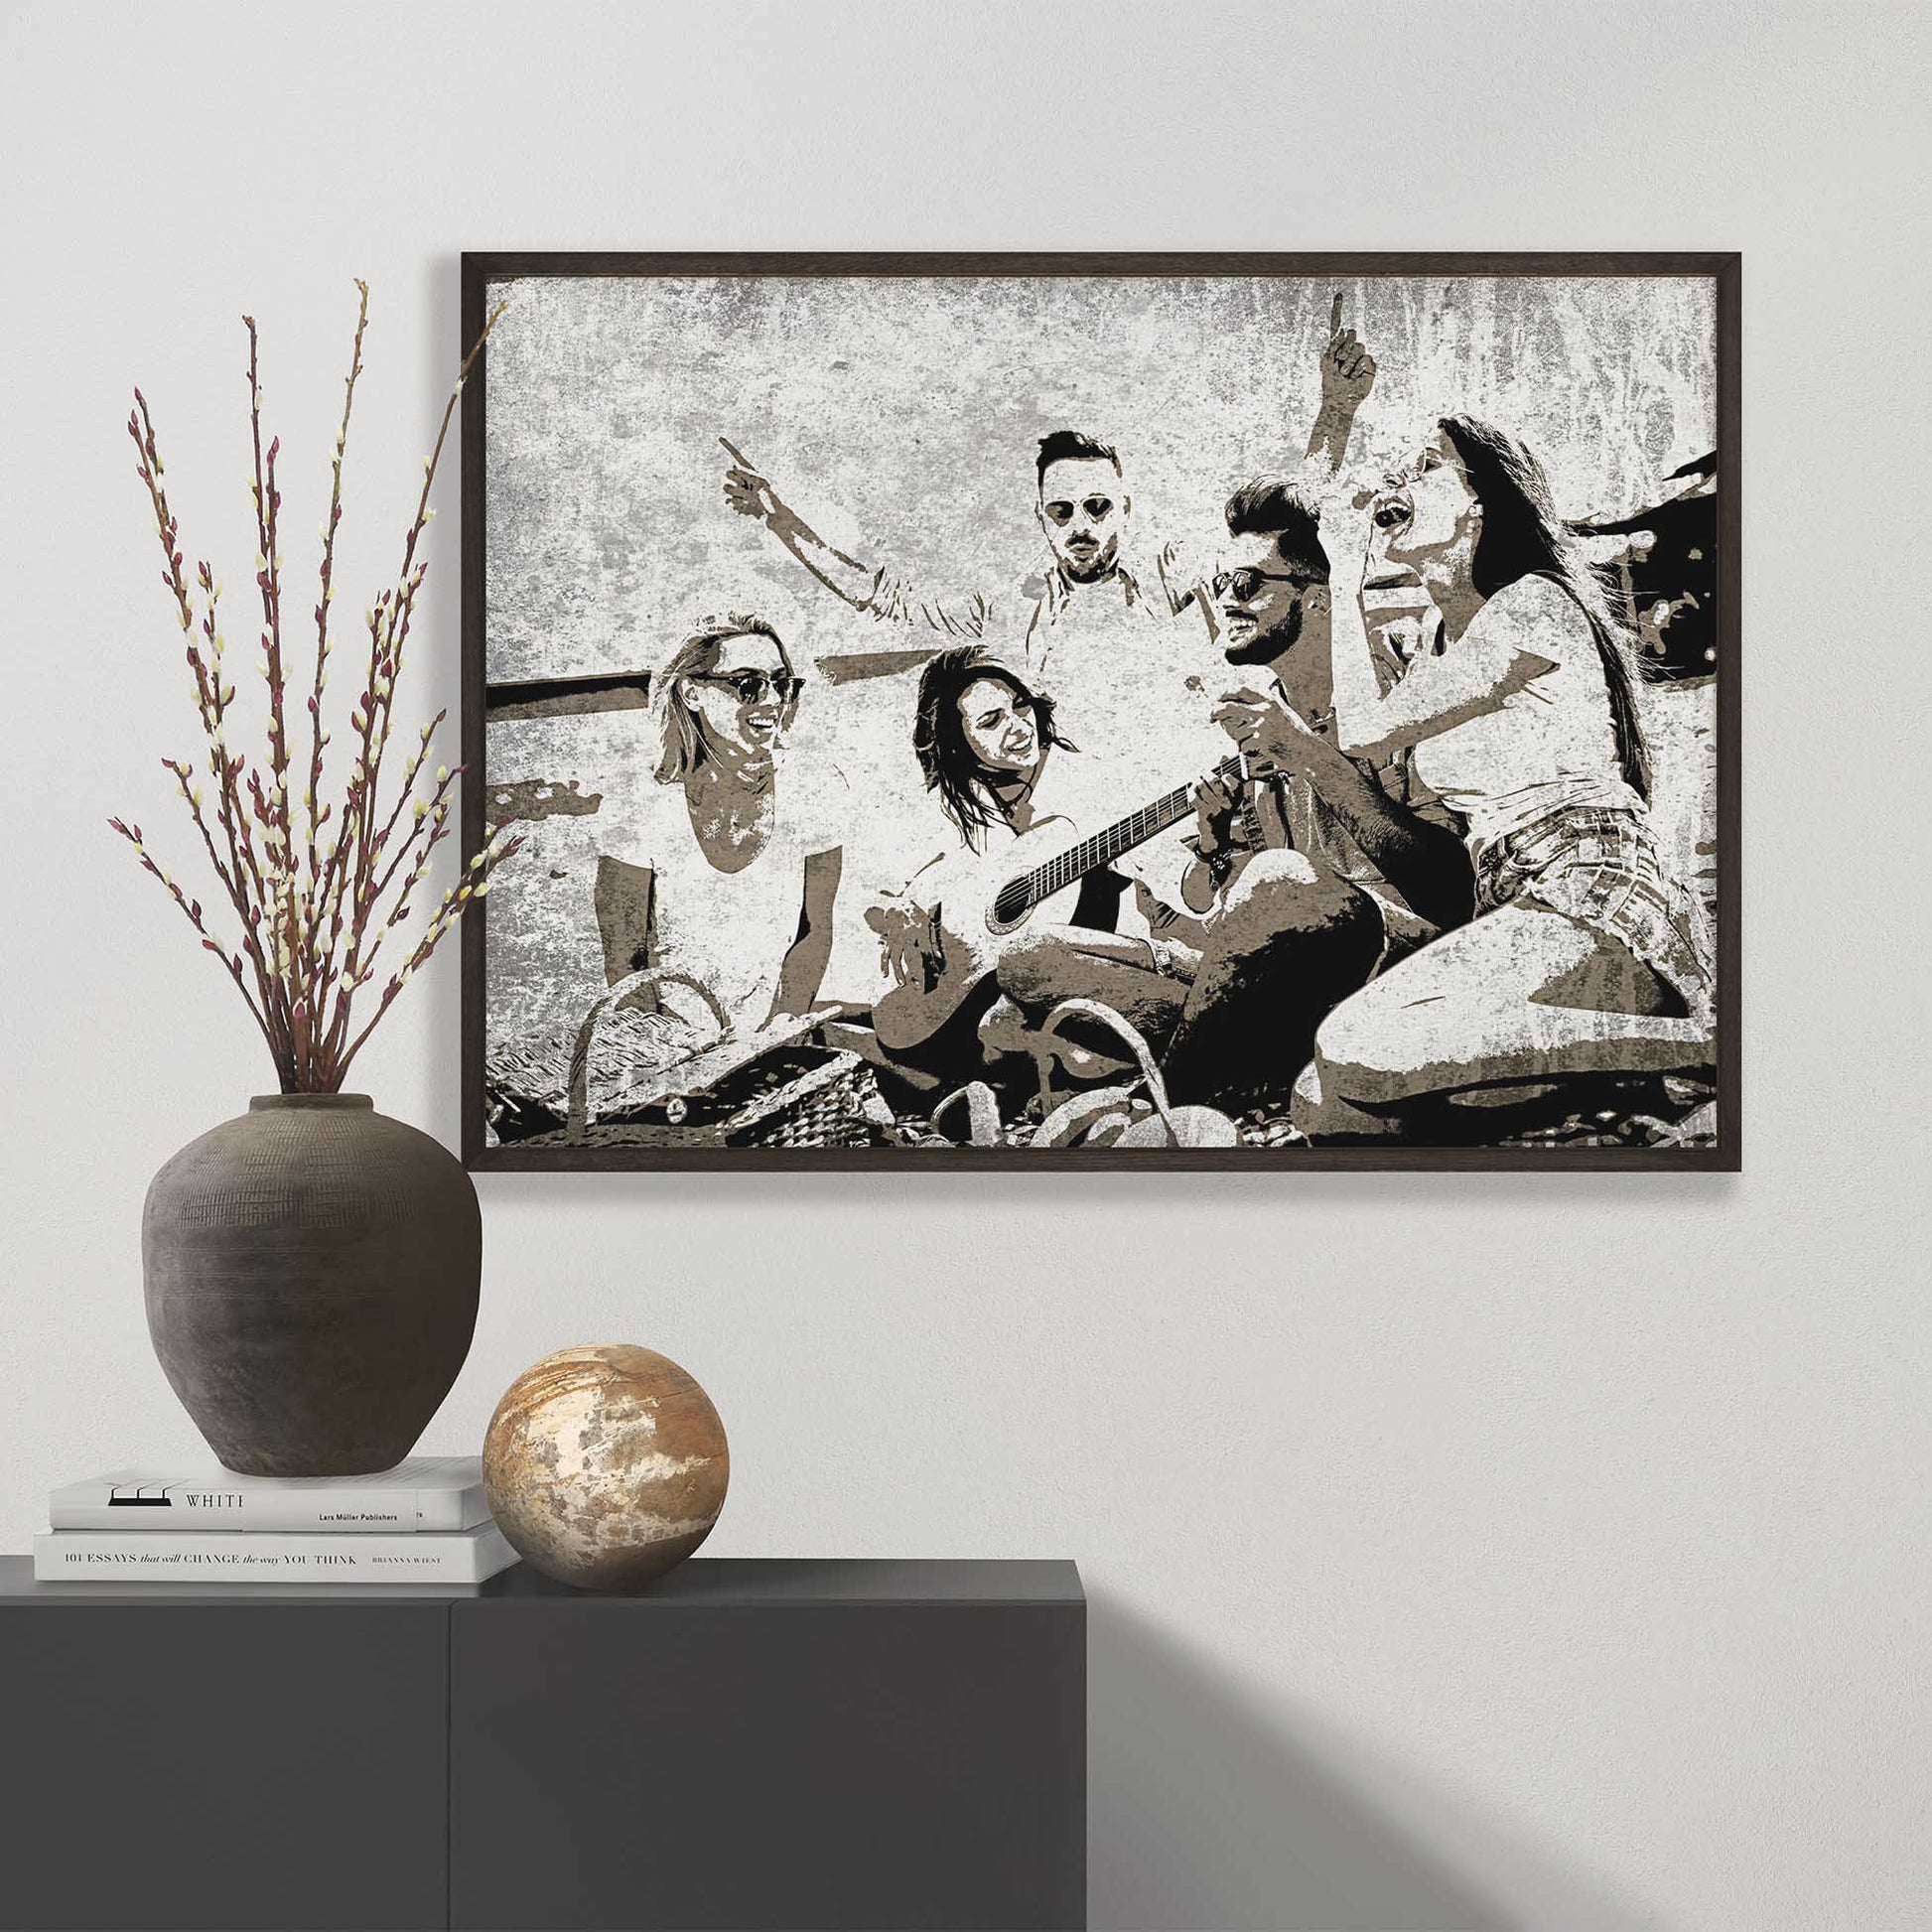 Make a statement with our Personalised Black & White Graffiti Street Art Framed Print. Printed from your photo, this unique artwork embraces urban style with its original street art aesthetic. Its minimalist and inspiring design 